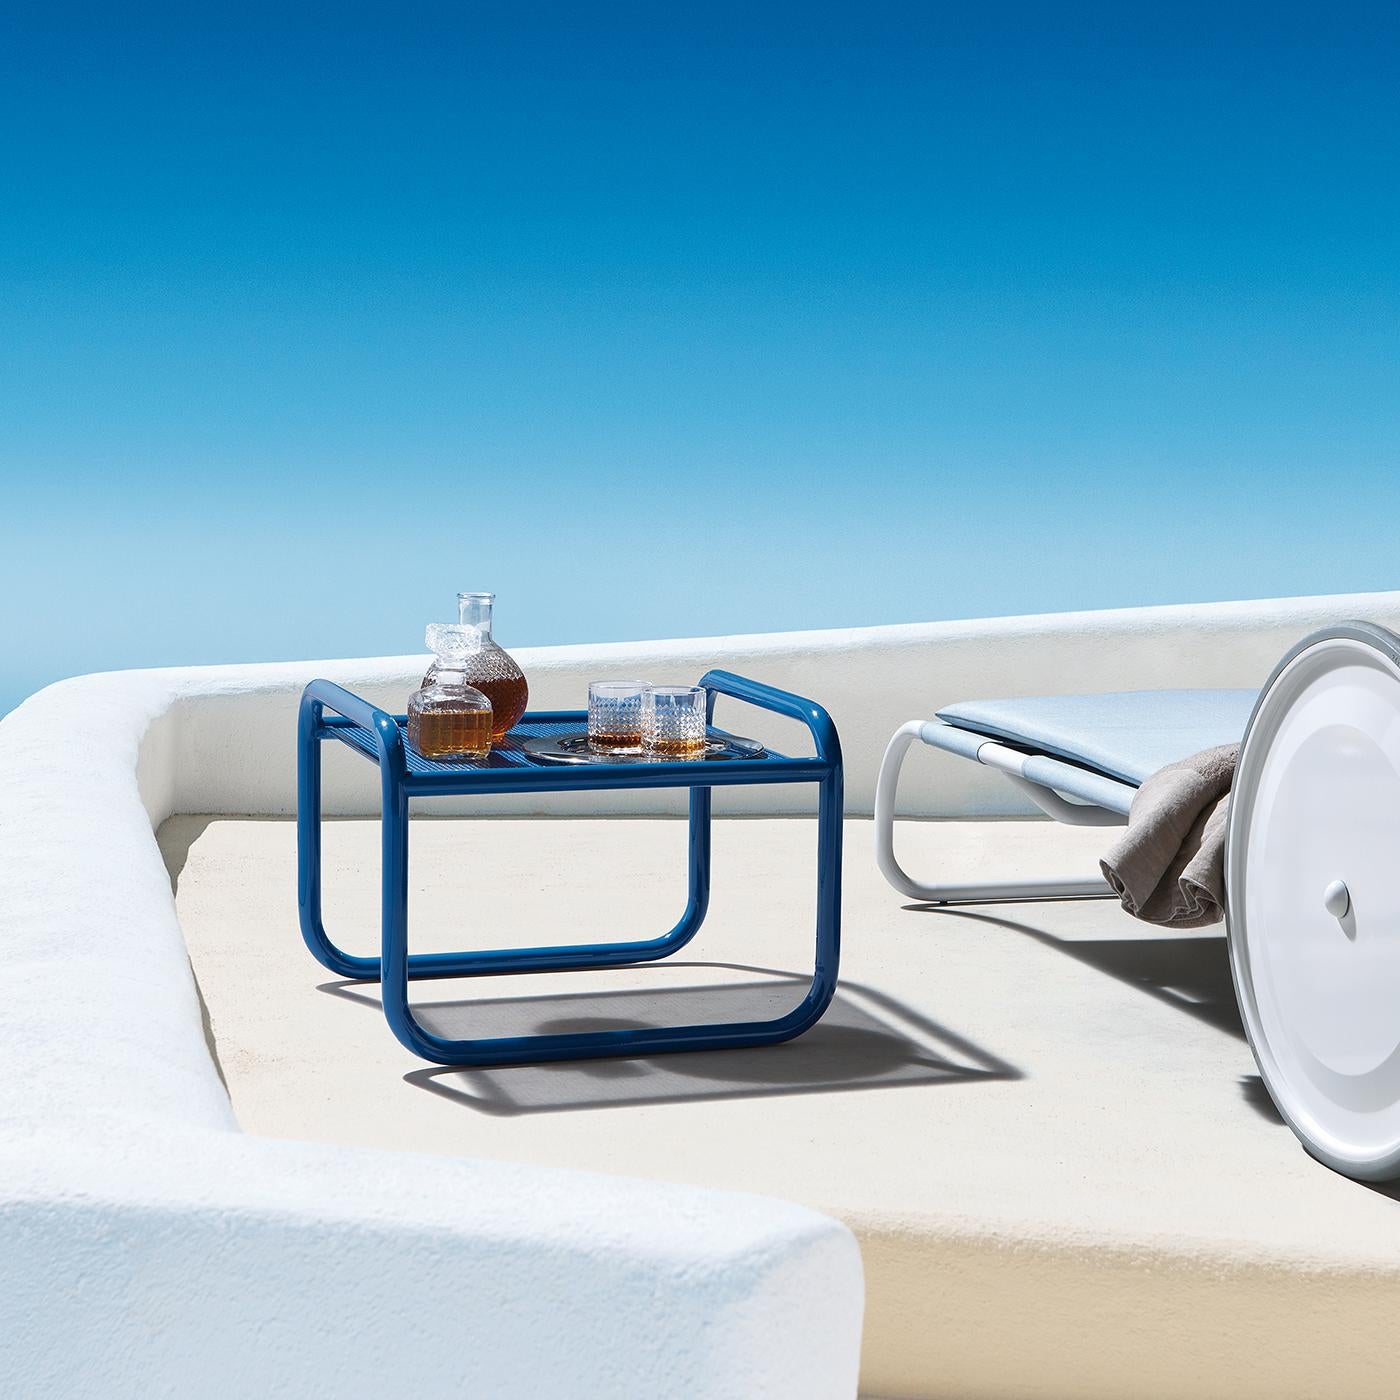 Aimed at bringing the same attention to detail usually reserved for interior decor, Gae Aulenti’s Locus Solus collection will transform a patio, garden, or veranda into a totally original and colorful place of sparkling personality. The cobalt blue